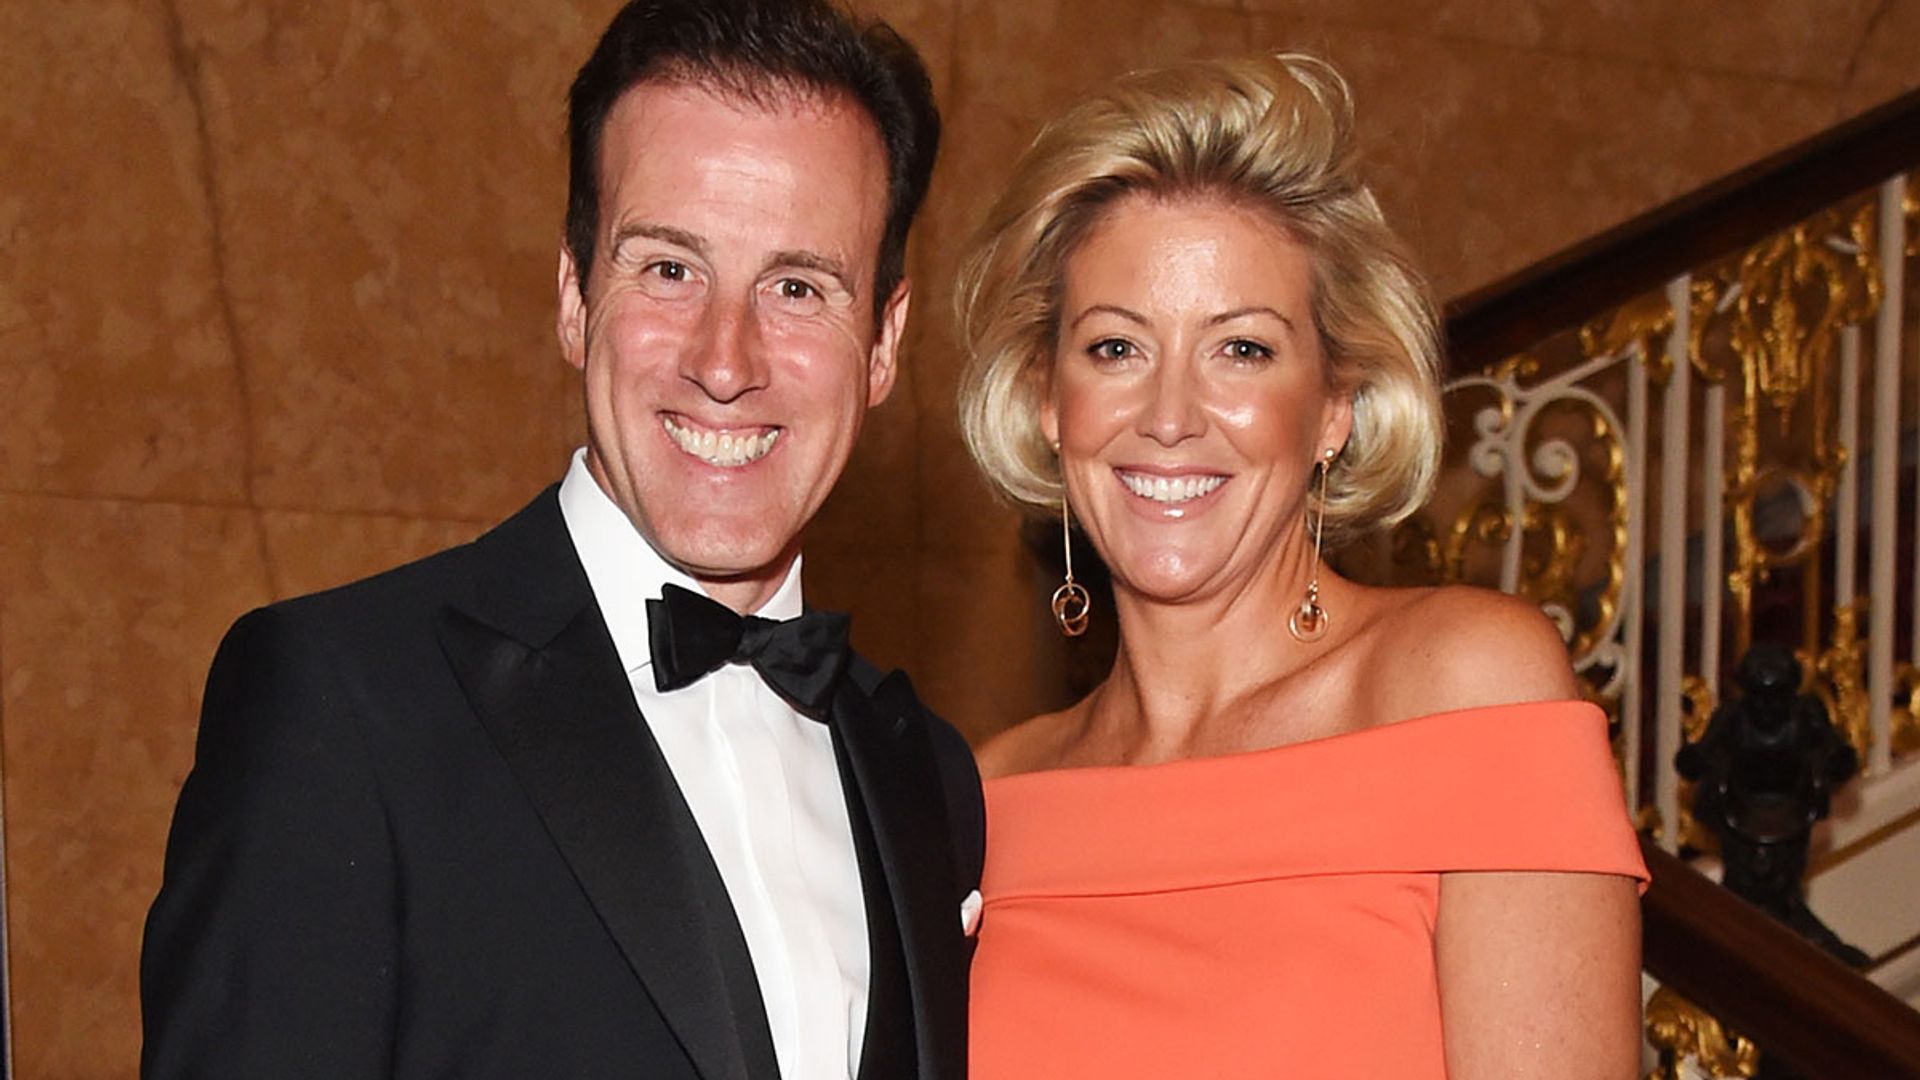 Strictly's Anton du Beke remembers wife Hannah's chronic illness in emotional video